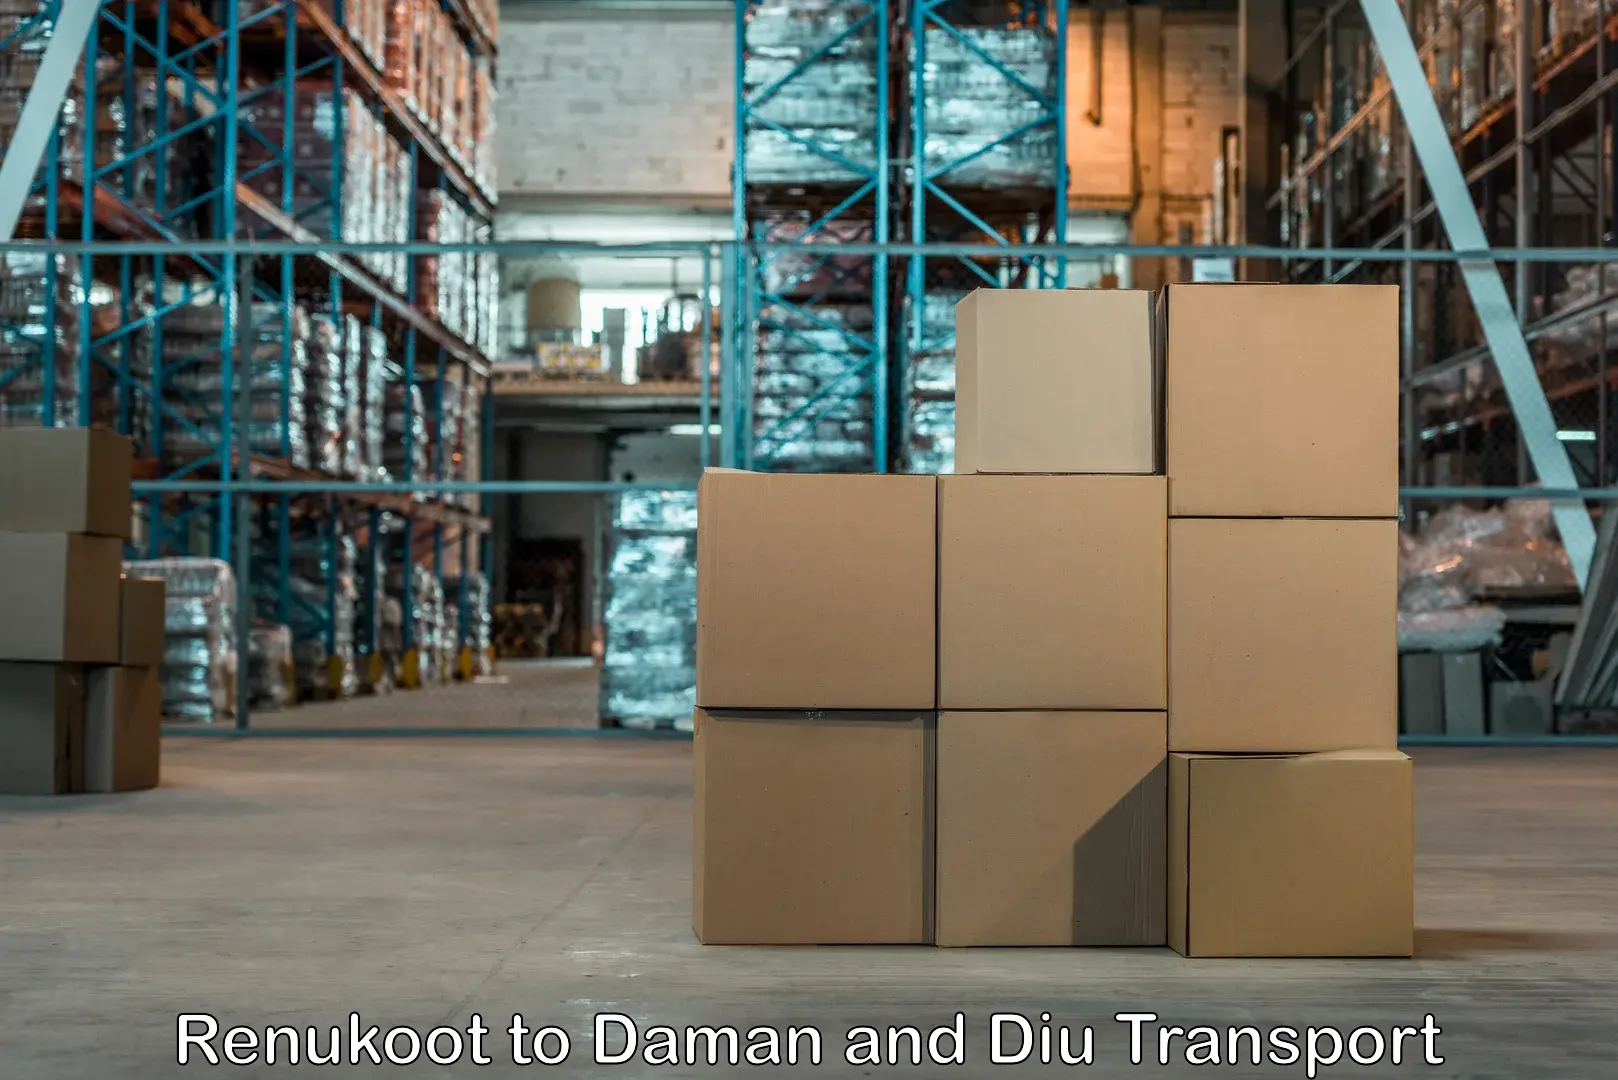 Transport shared services Renukoot to Daman and Diu